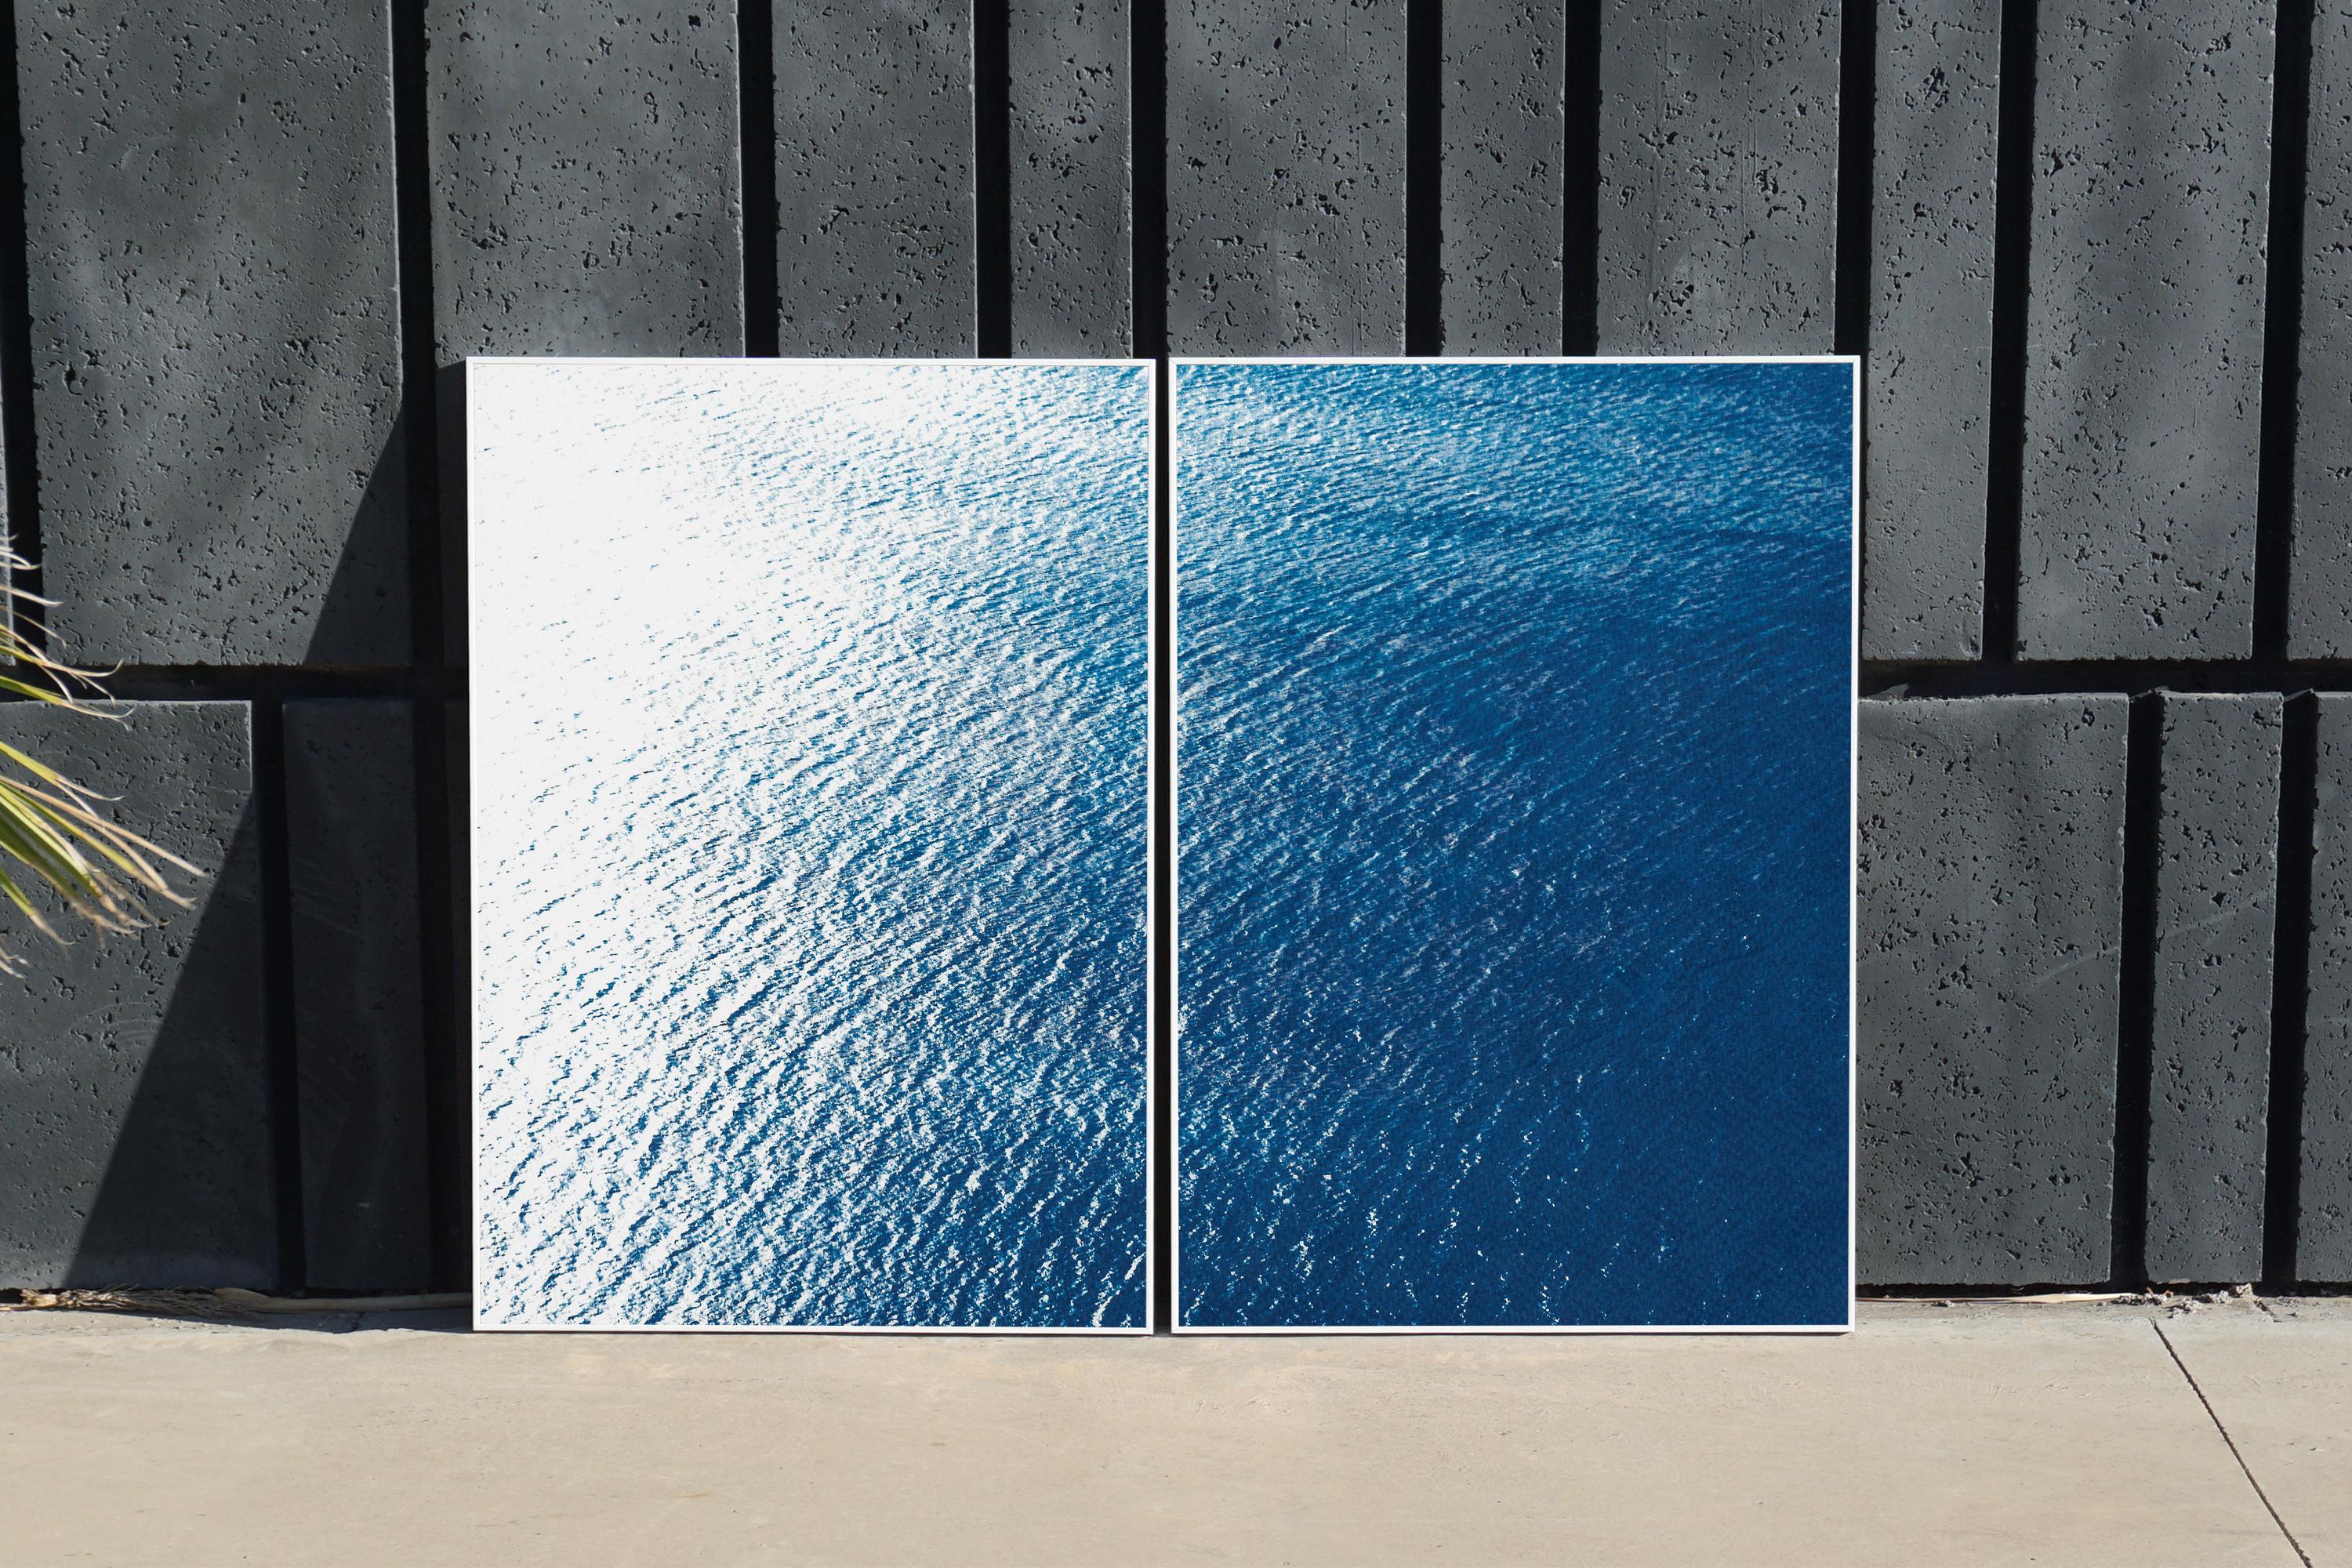 Smooth Bay in the Mediterranean, Classic Blue Diptych, Zen Seascape Coastal Life - Abstract Impressionist Painting by Kind of Cyan